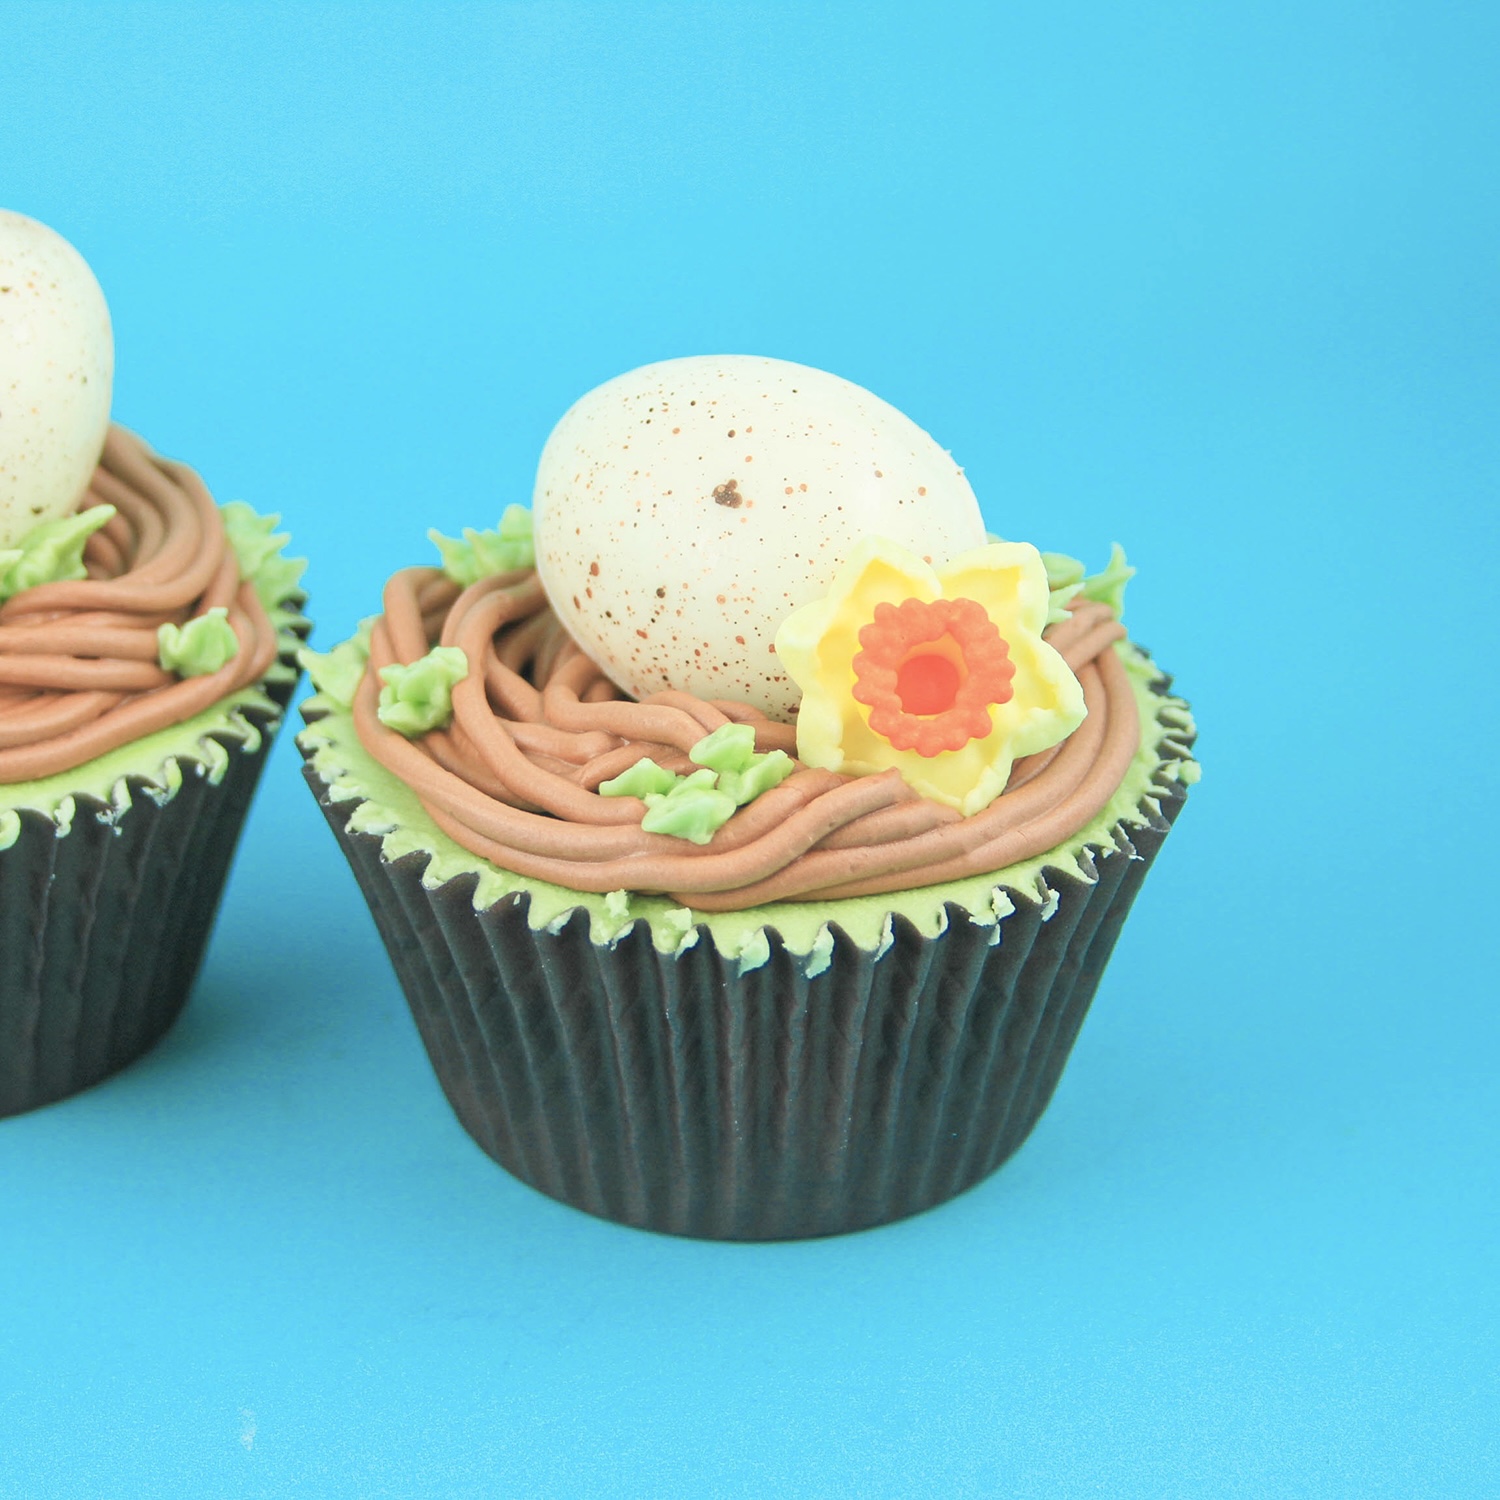 Cupcake with brown buttercream nest and chocolate speckled egg and sugar flower